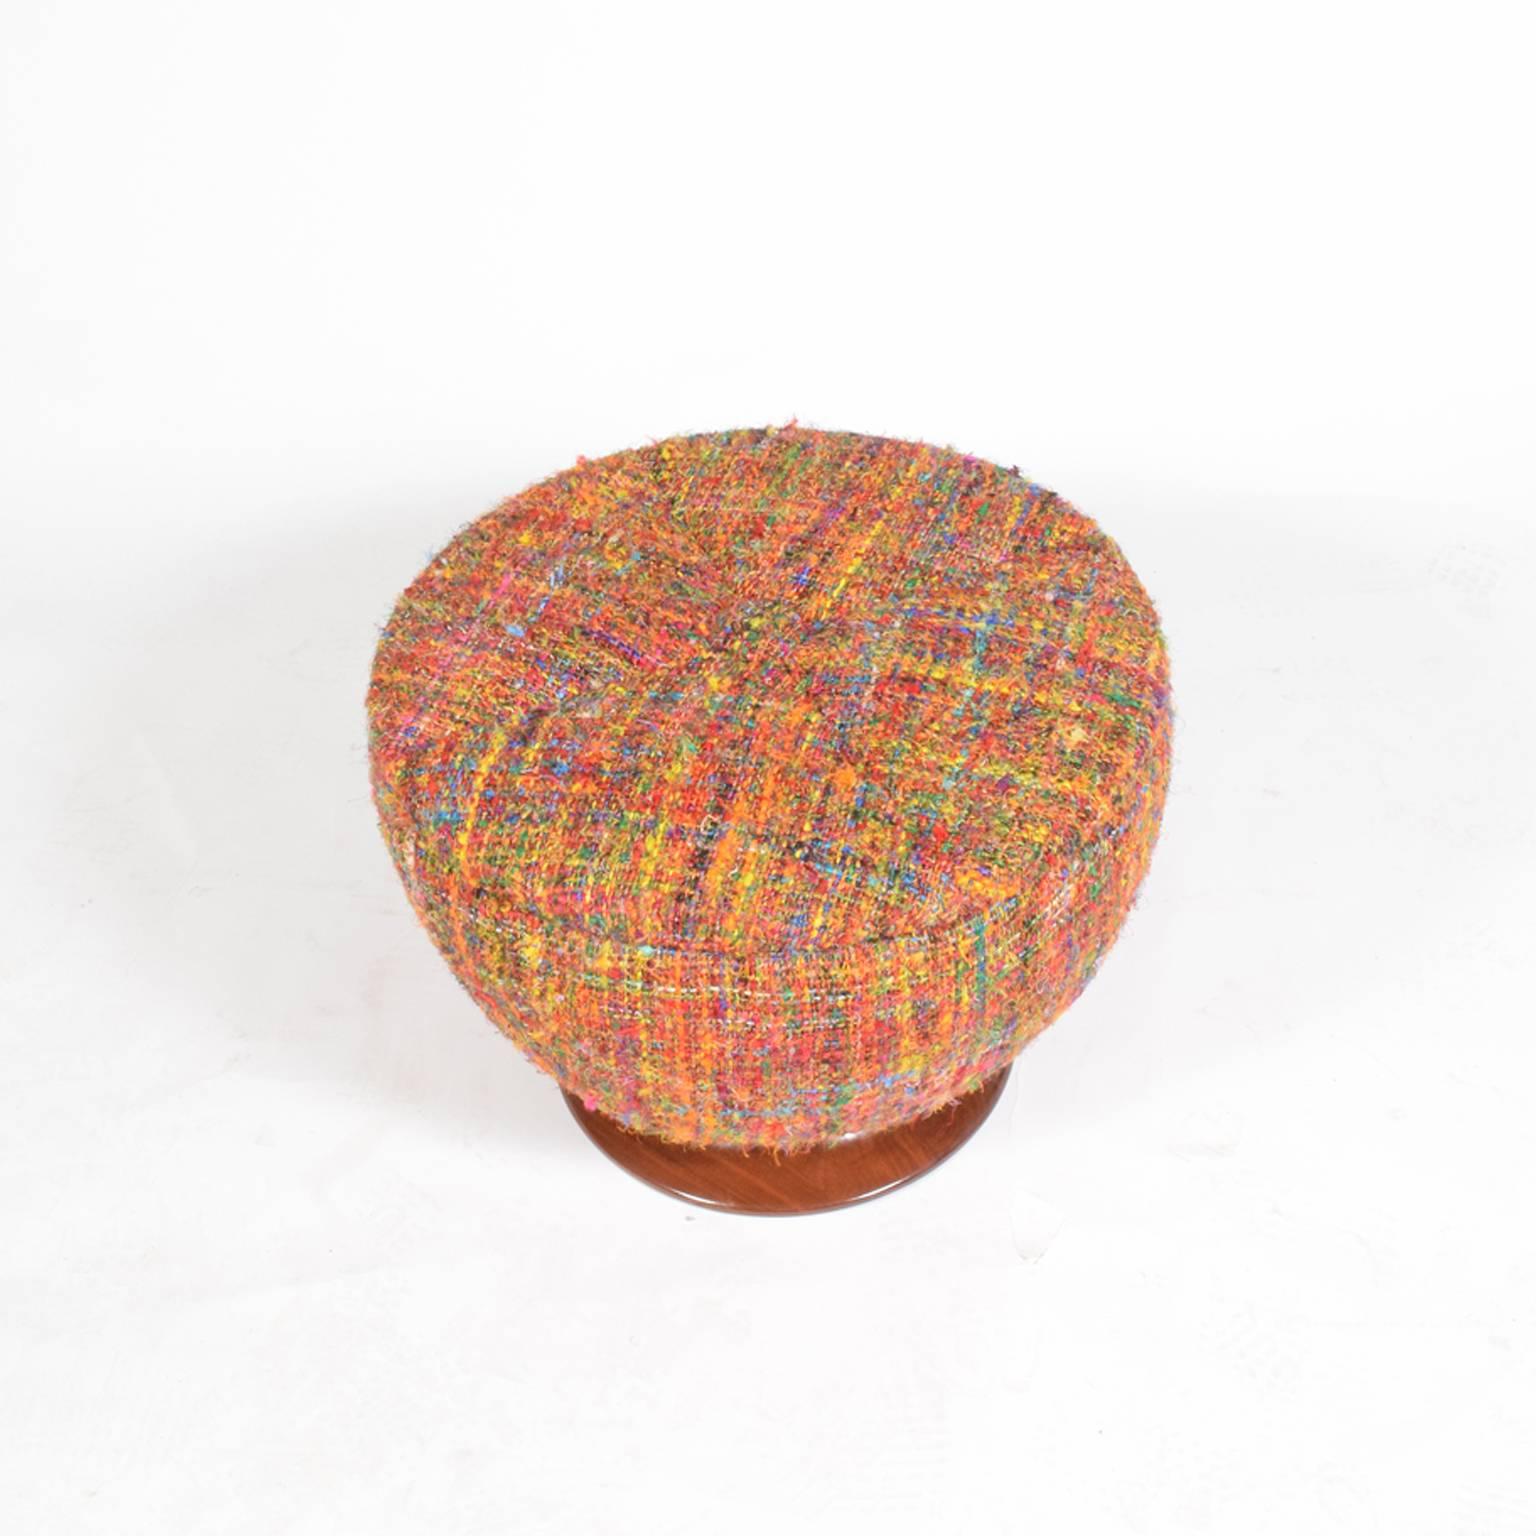 American designed 1930s large round upholstered stool or ottoman with removable lid for storage on solid walnut base. New heavy multi color textured fabric.